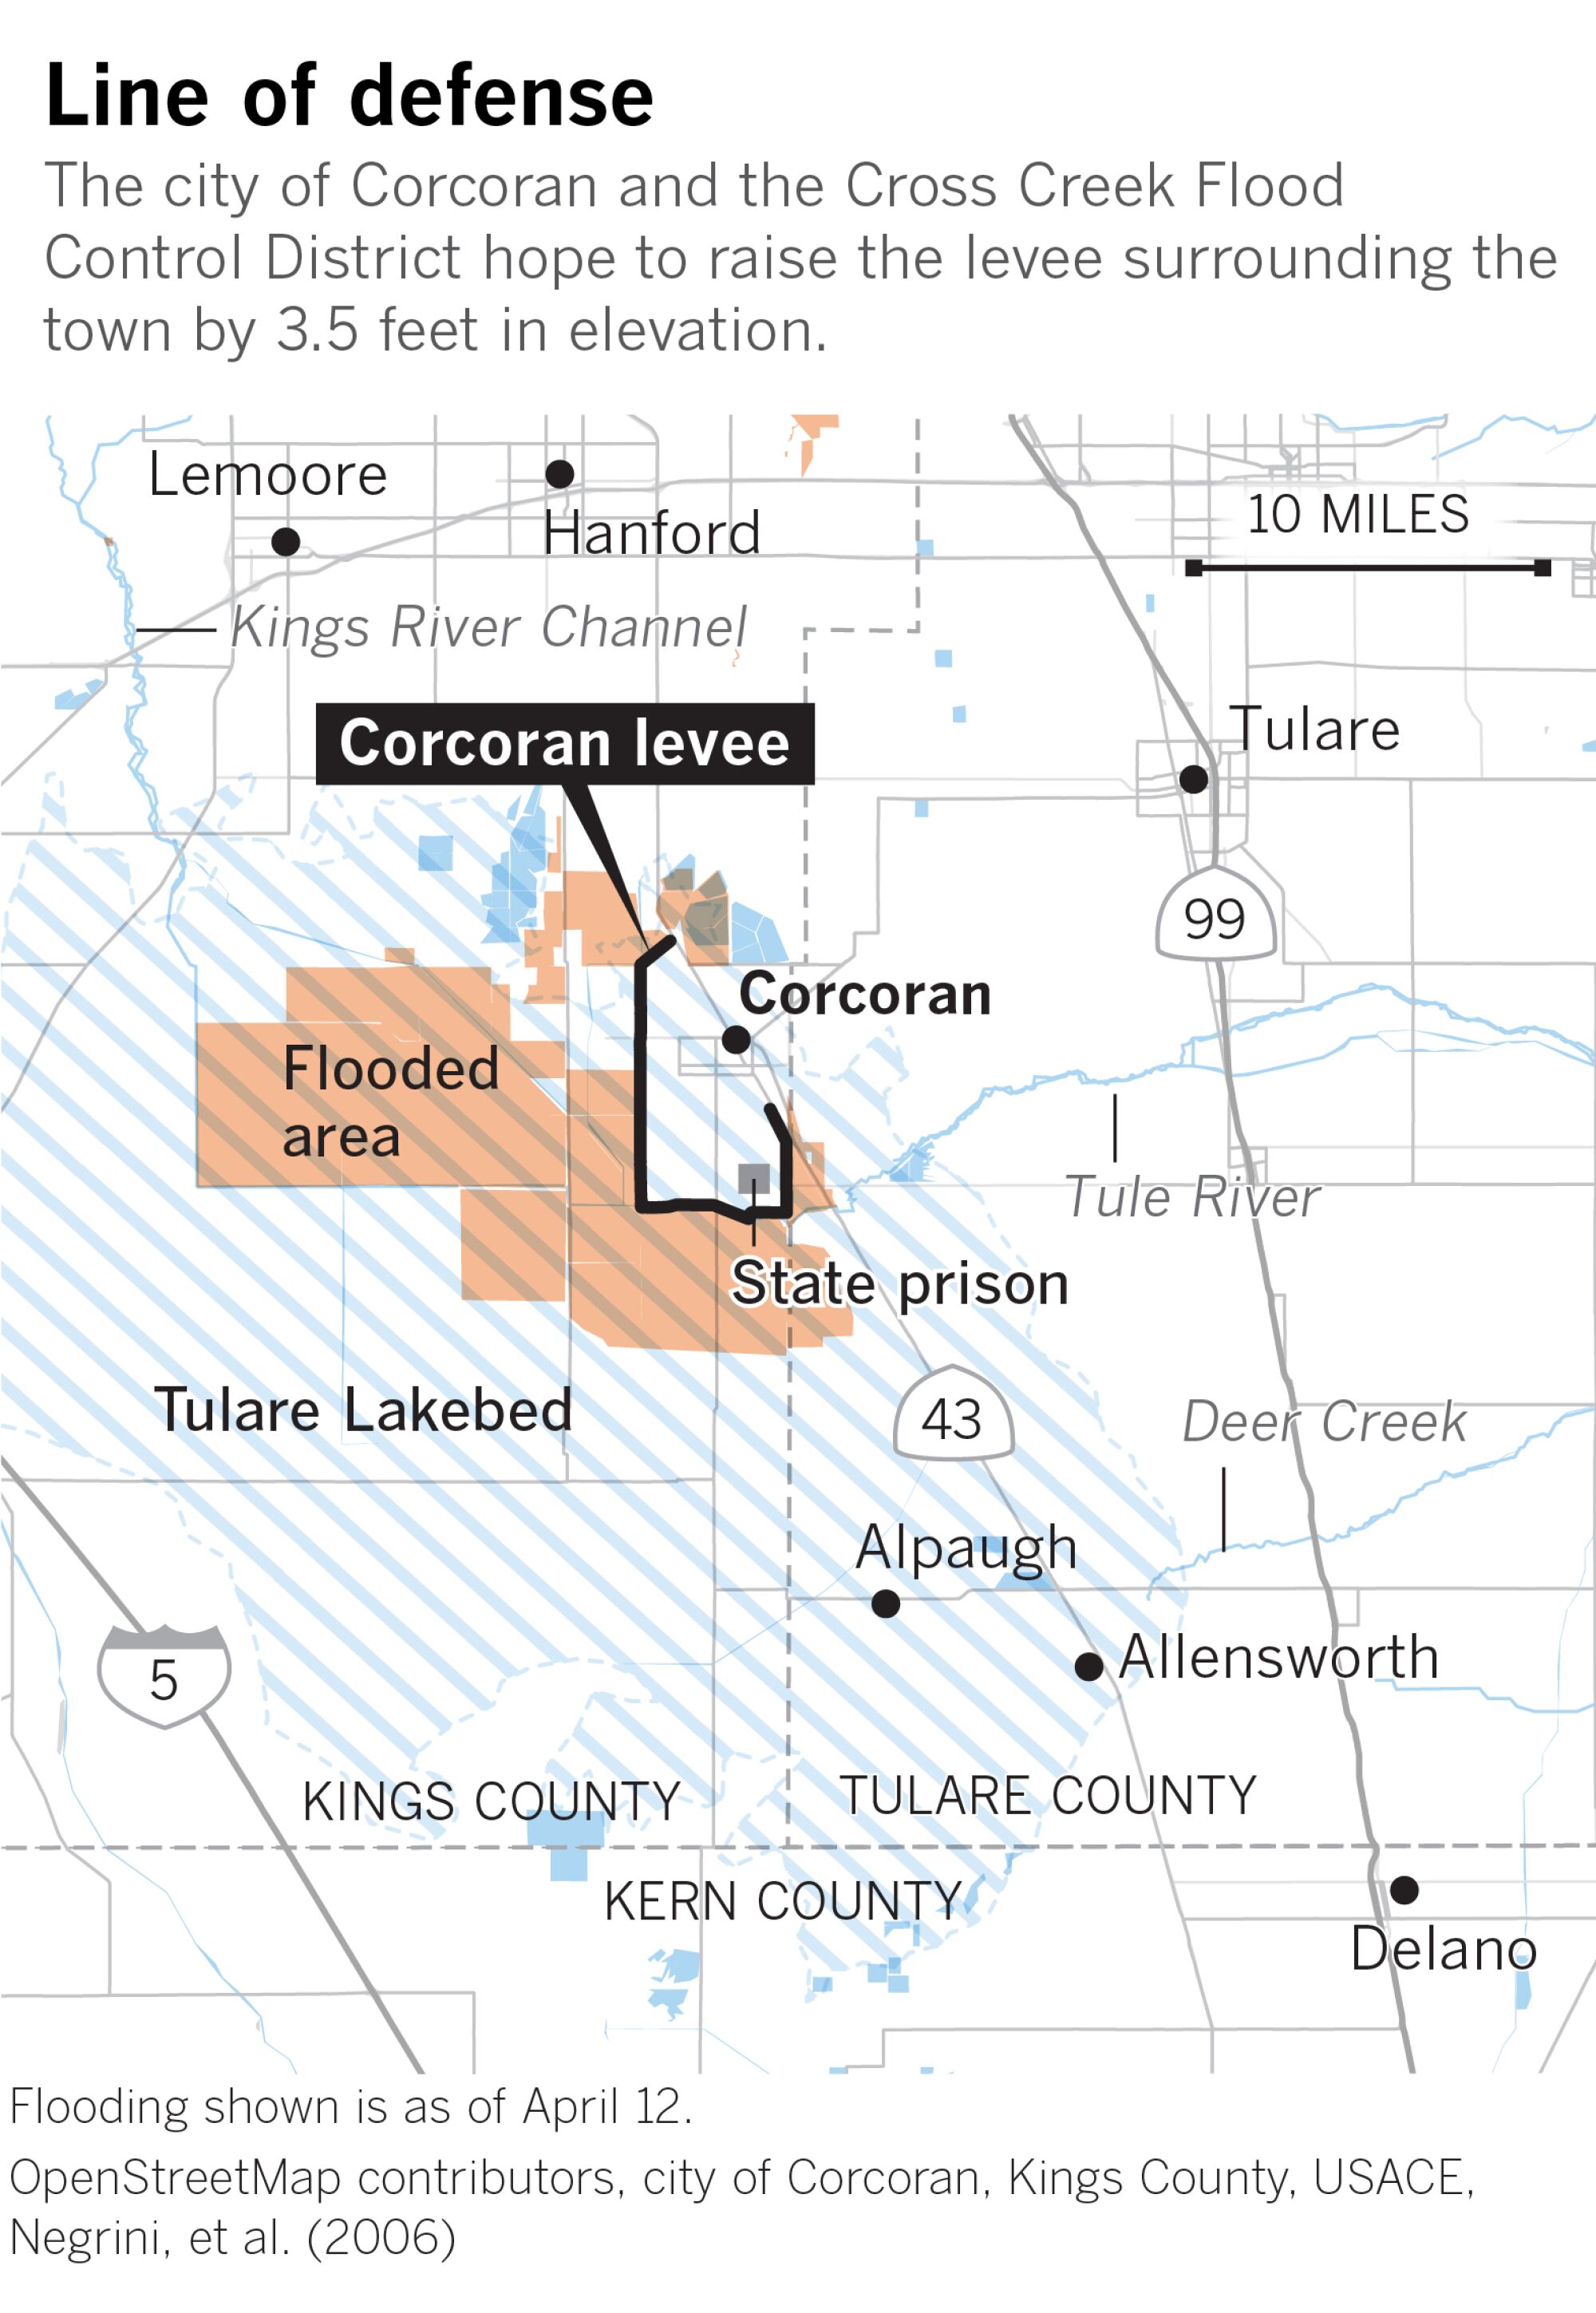 Map of Tulare Lakebed and Corcoran, with its protective levee.